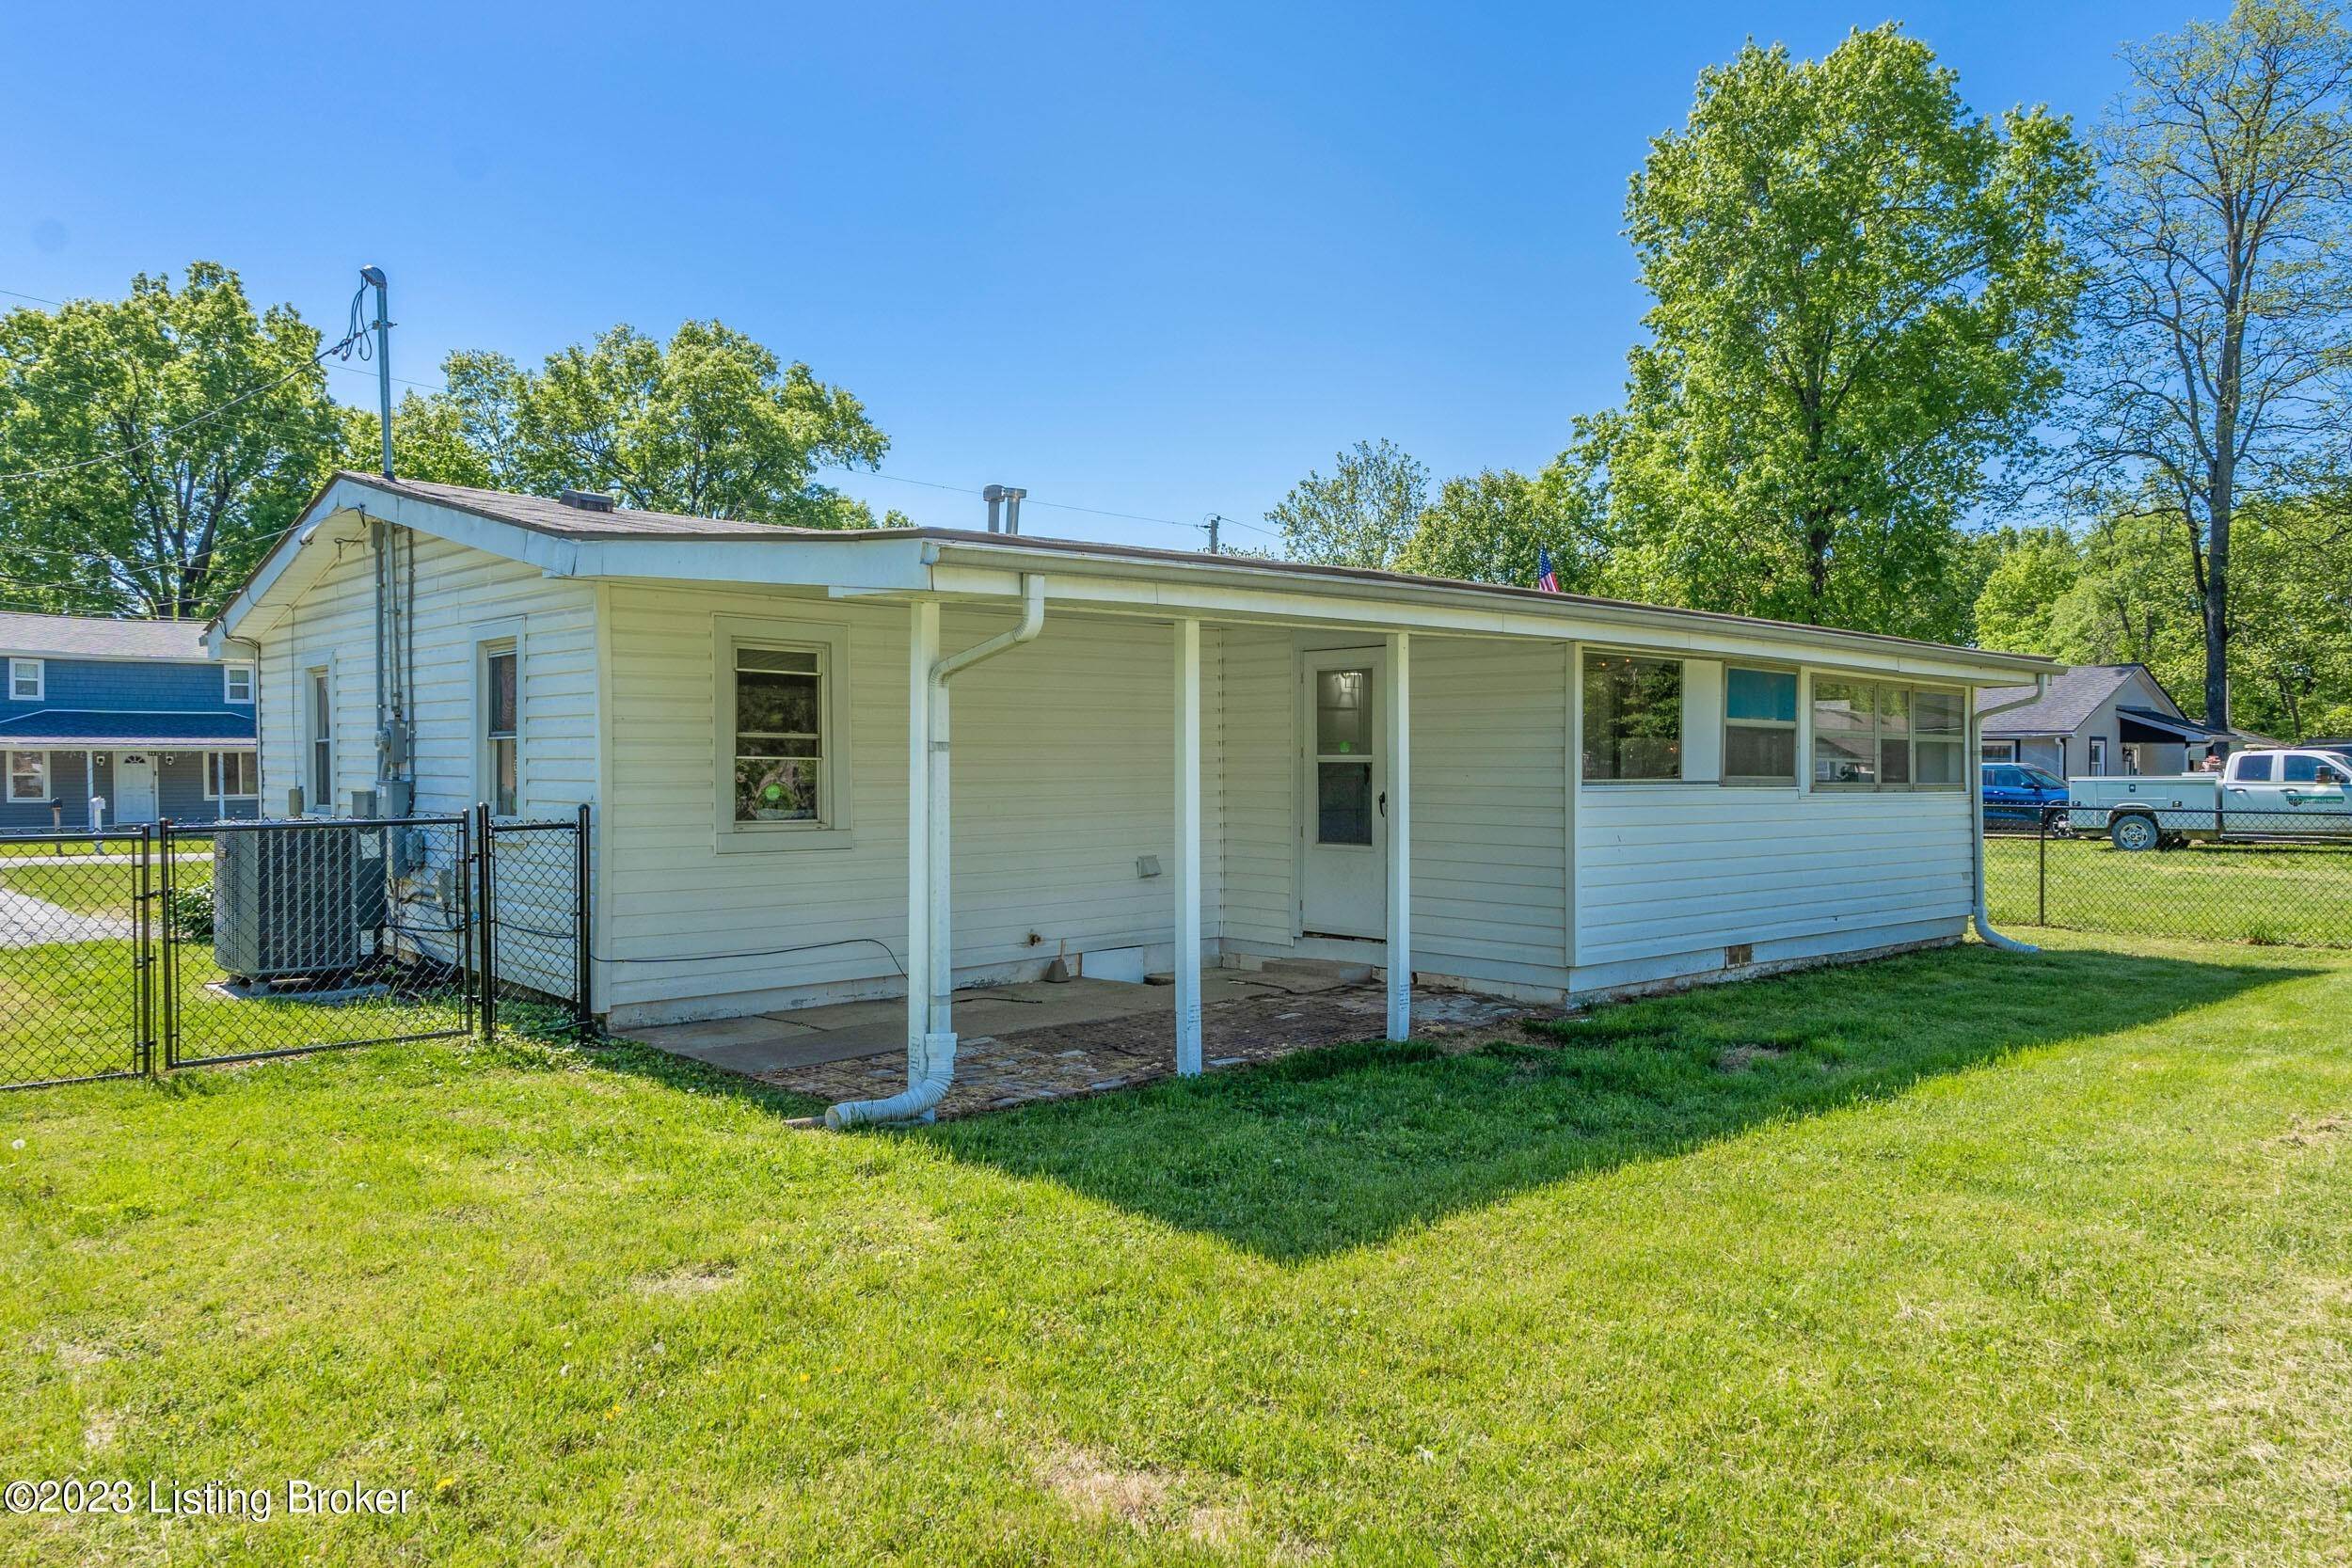 29. Single Family at Louisville, KY 40258